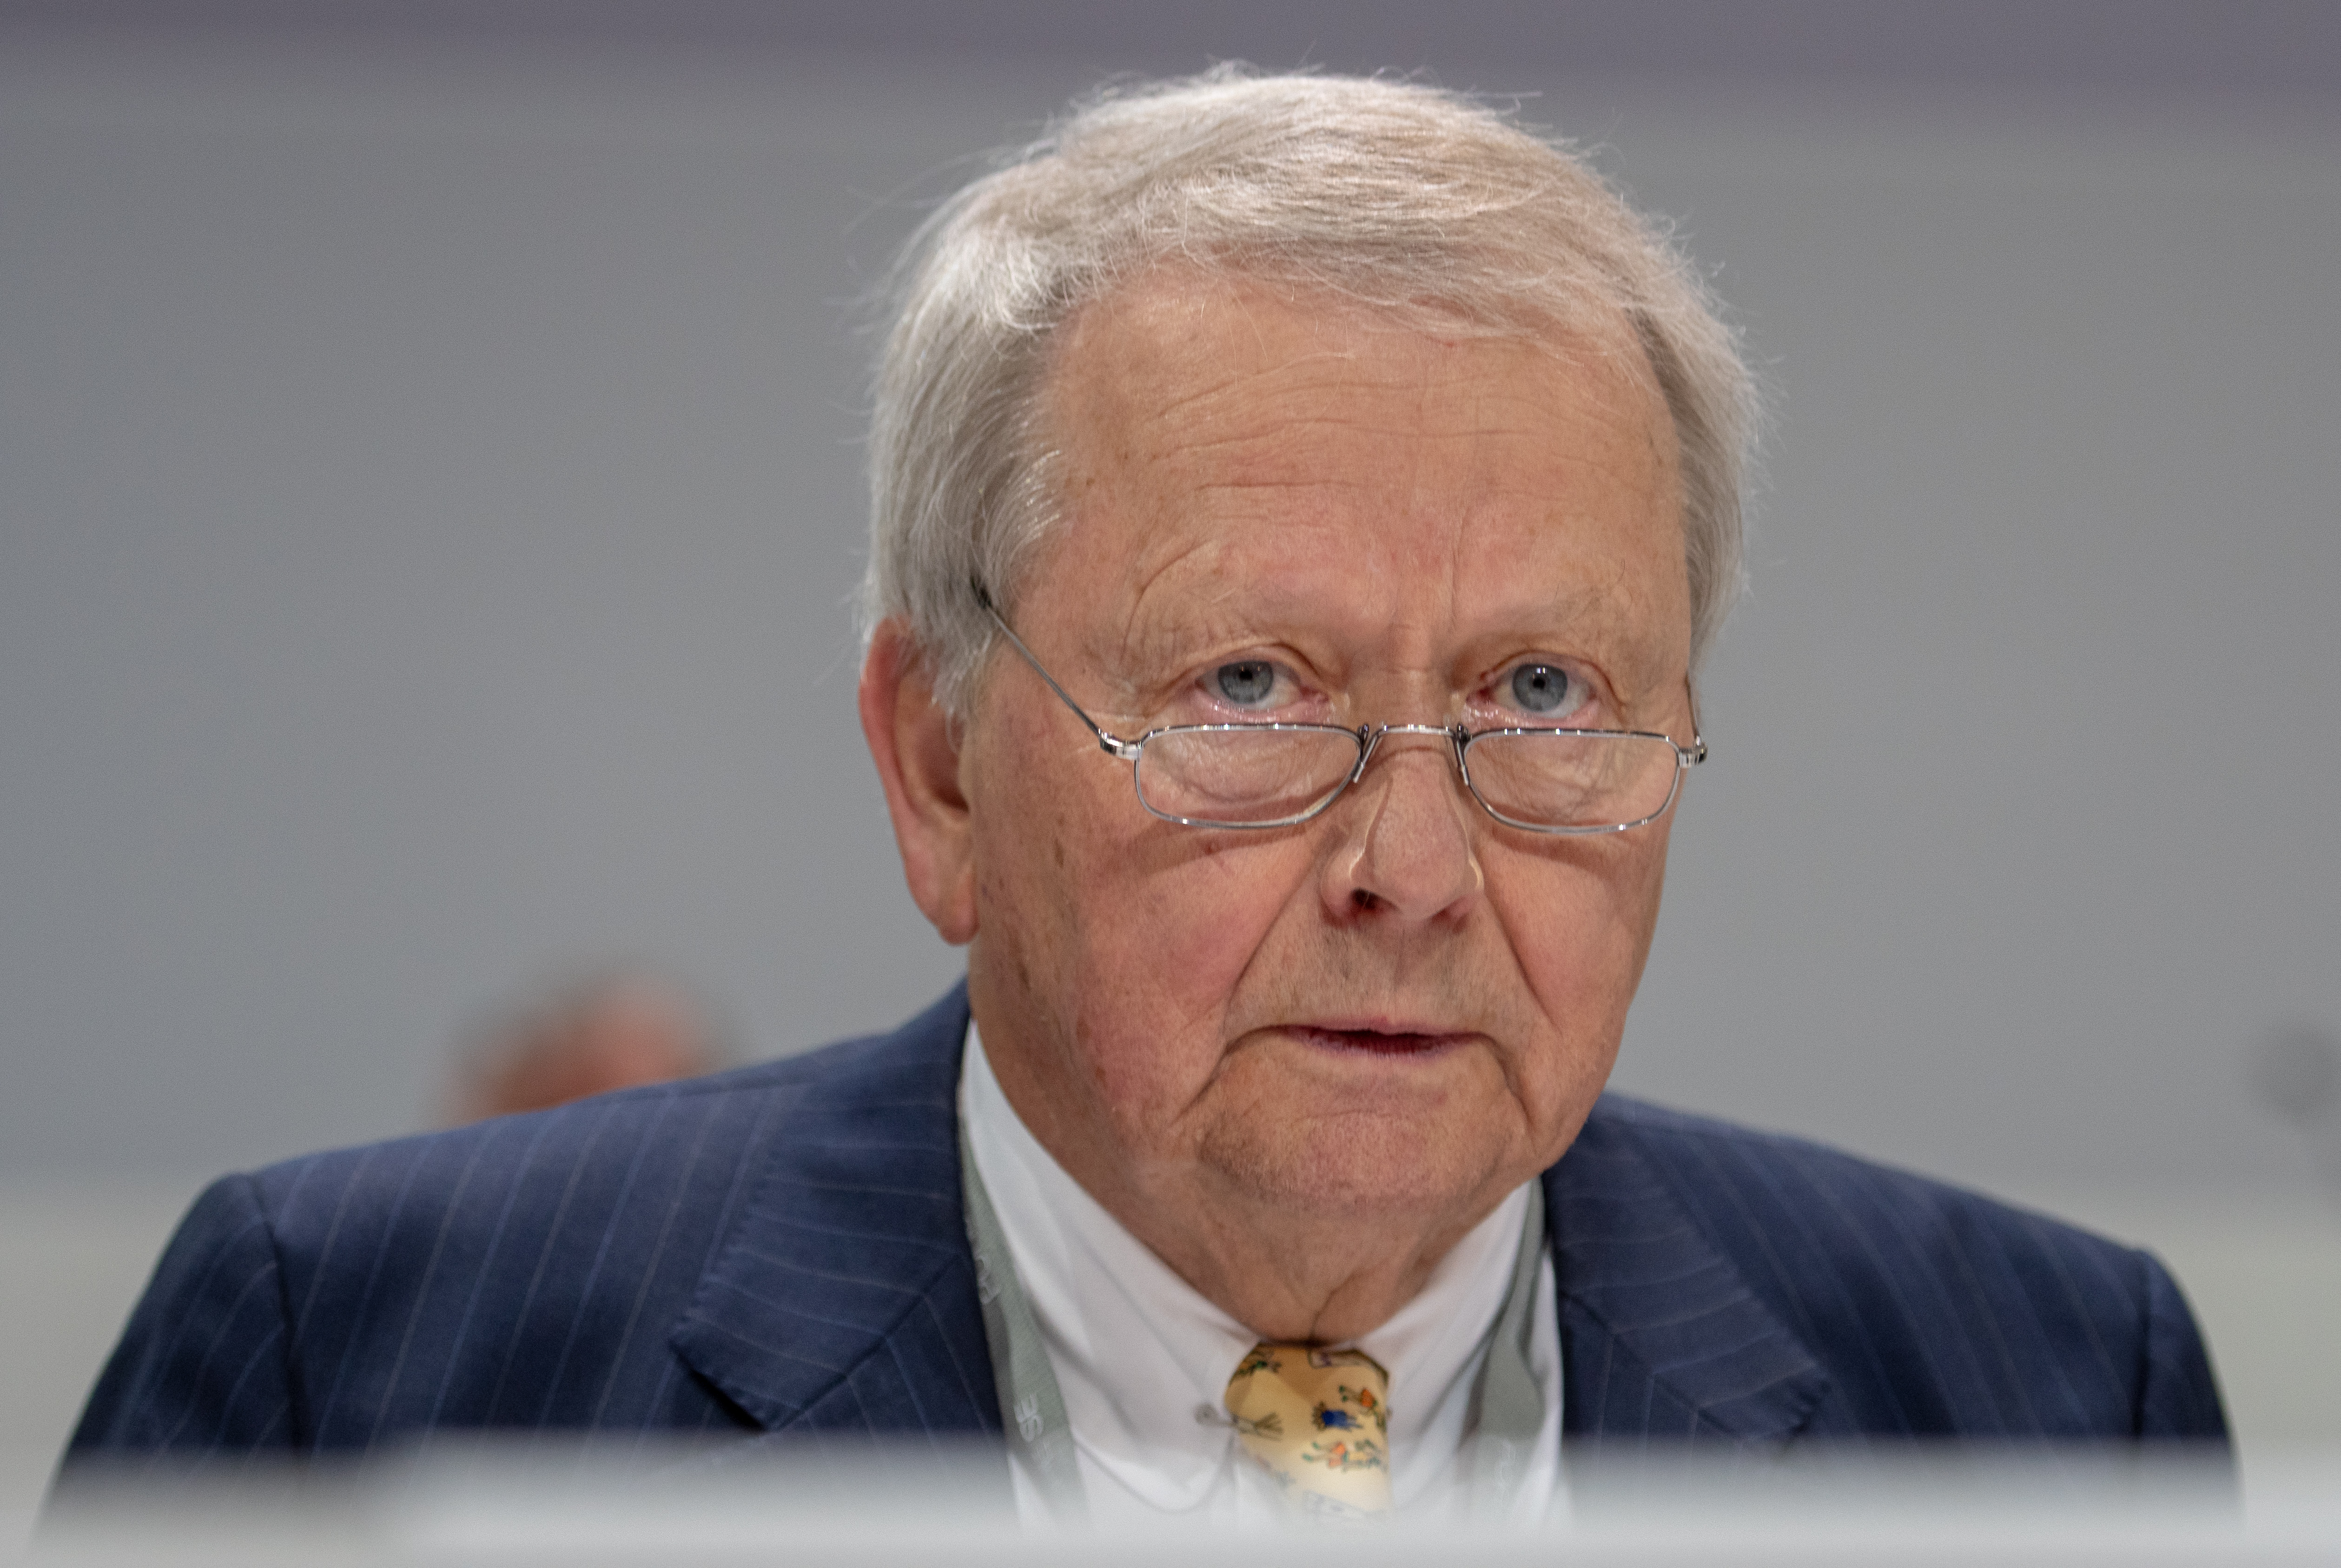 Wolfgang Porsche at the Annual General Meeting of Porsche Automobil Holding SE. | Source: Getty Images